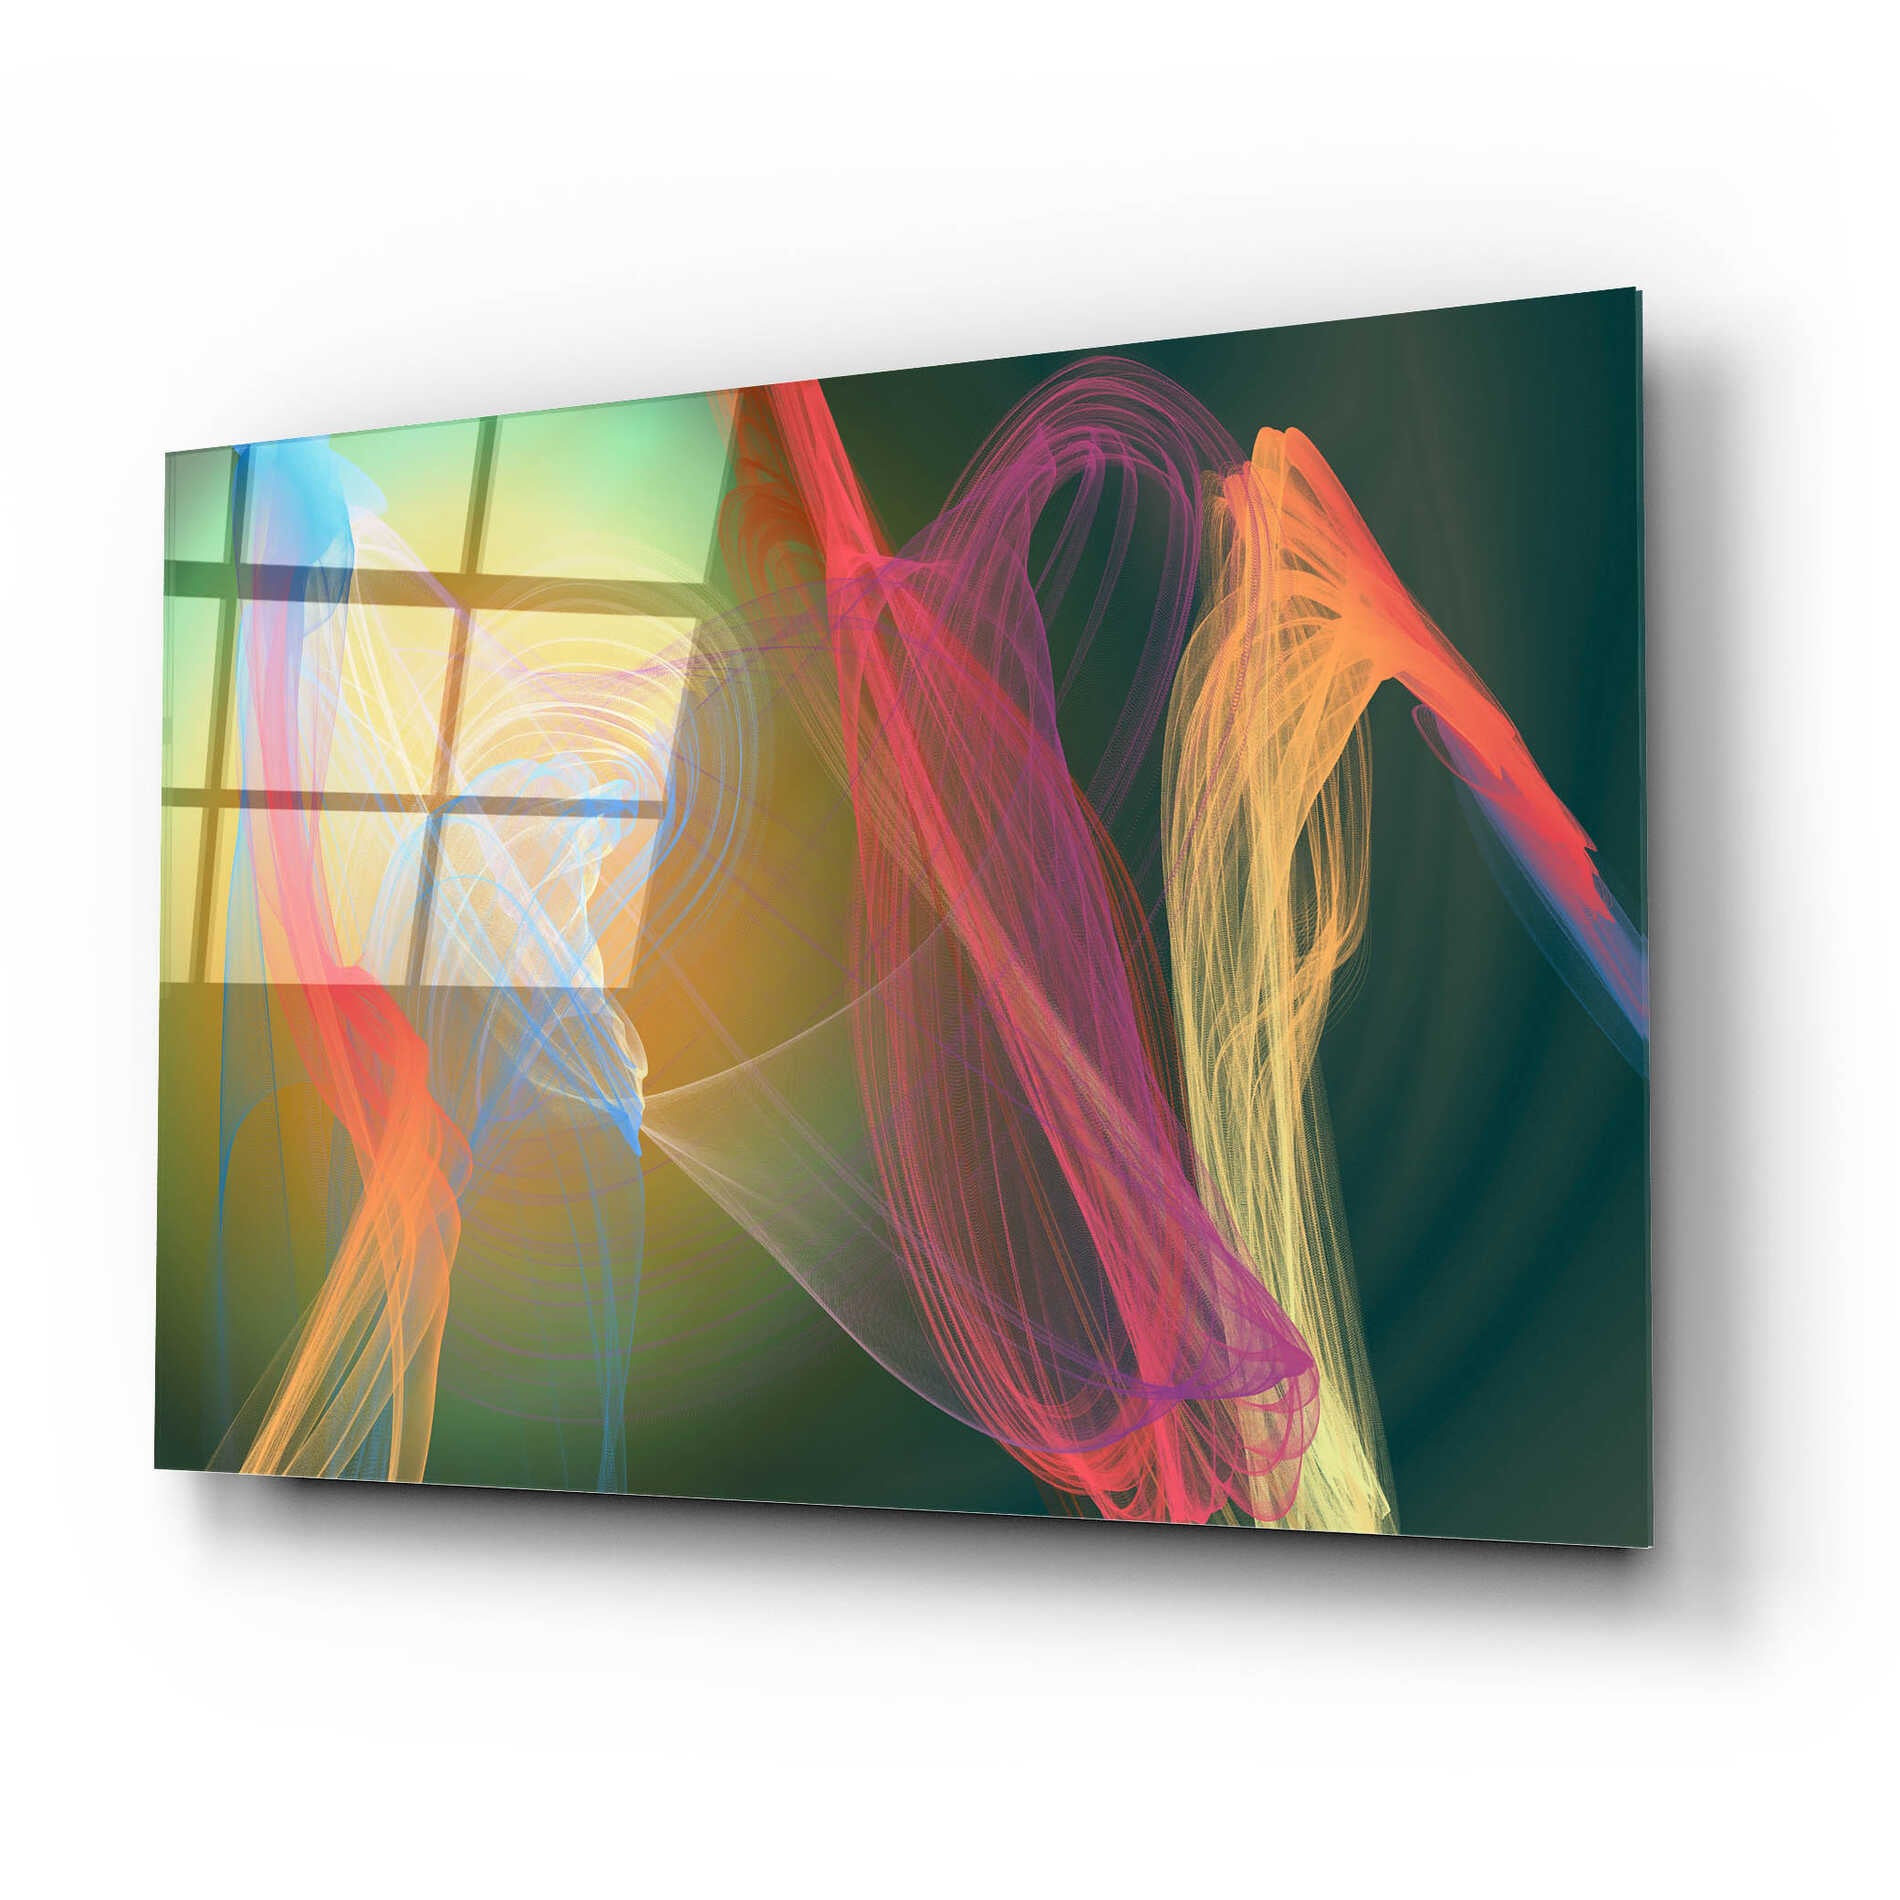 Epic Art 'Inverted Color In The Lines 9' by Irena Orlov Acrylic Glass Wall Art,24x16